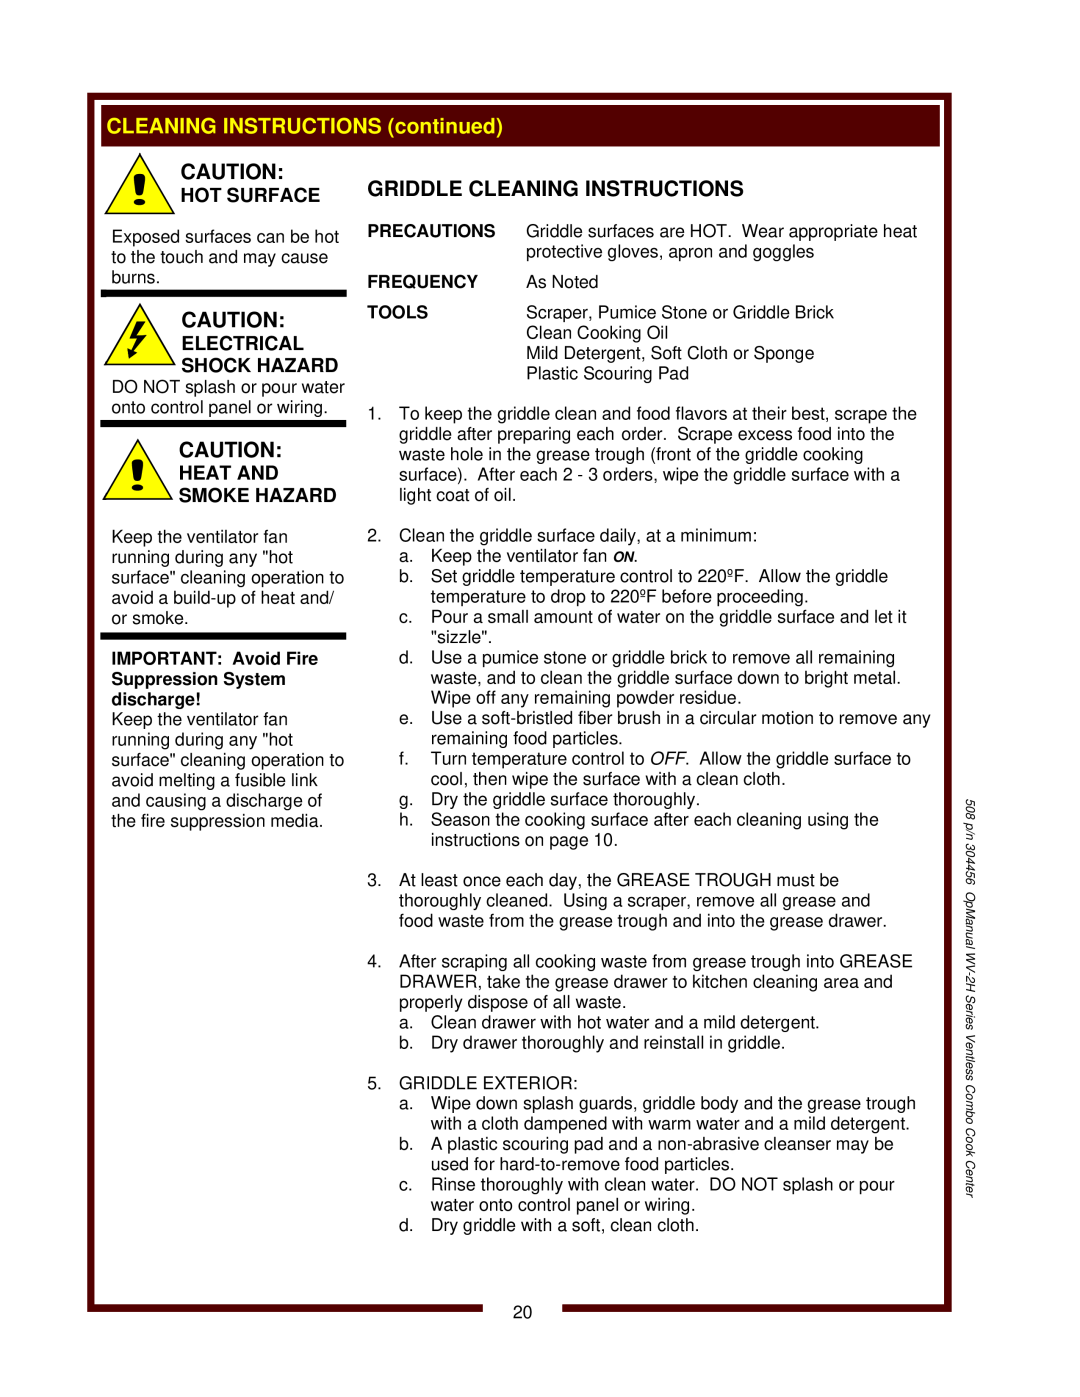 Bloomfield WV-2HFG, WV-2HSG Griddle Cleaning Instructions, Electrical Shock Hazard, Heat And Smoke Hazard, Hot Surface 